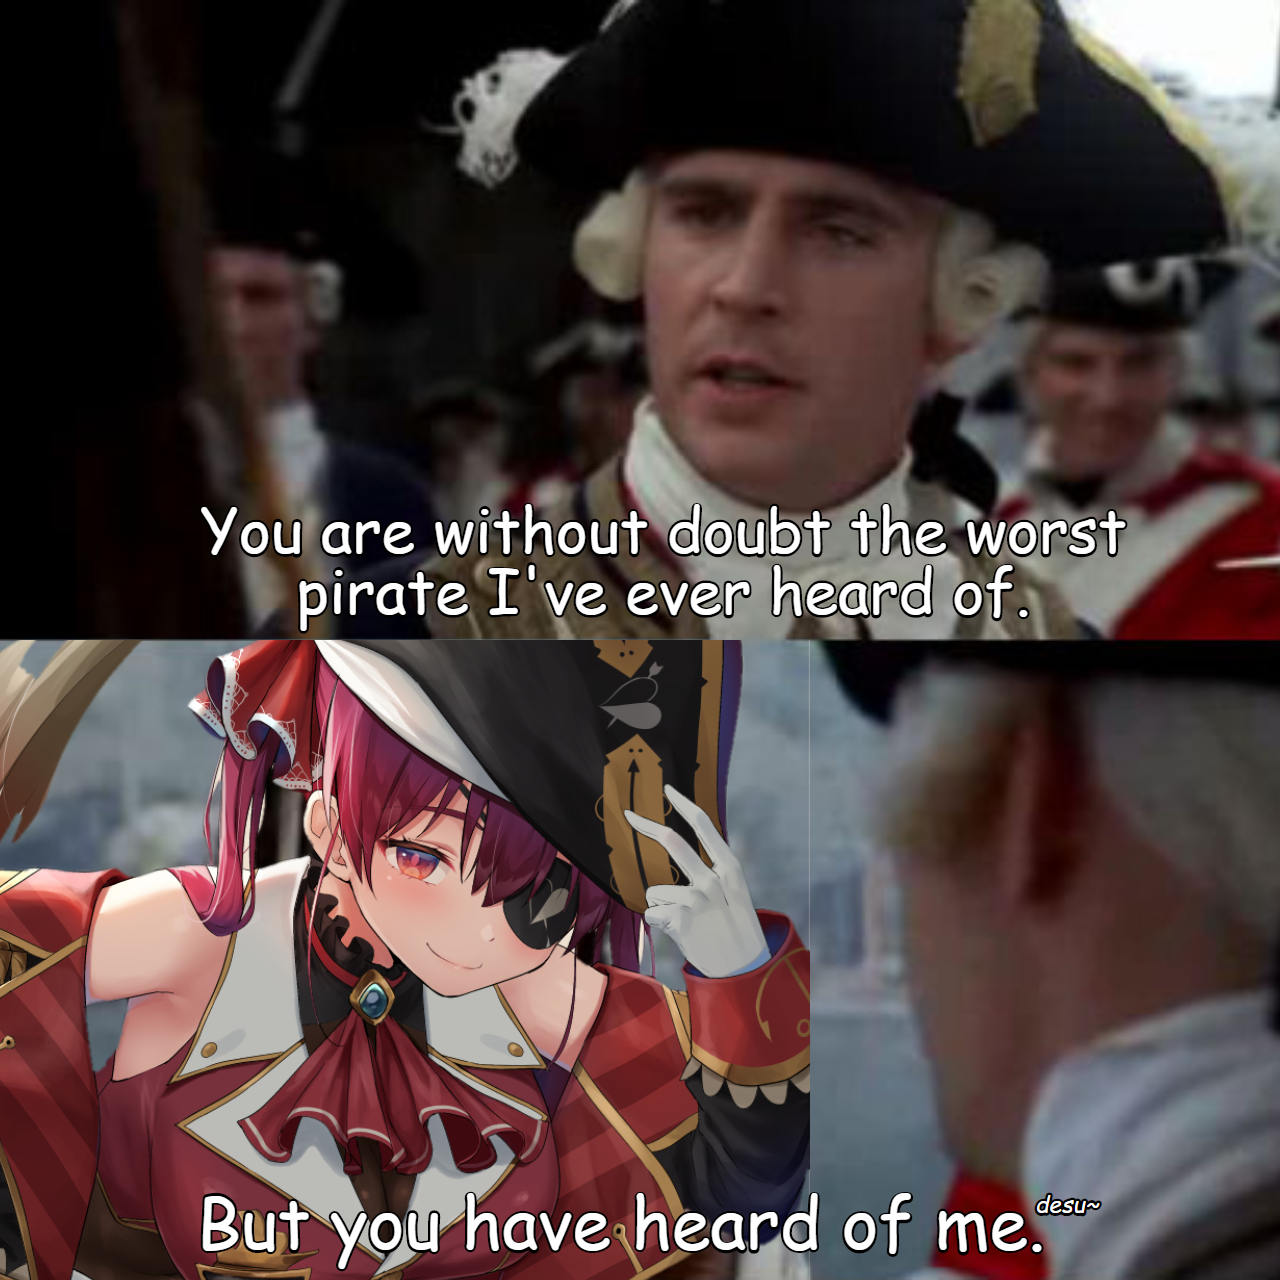 That’s gotta be the horniest pirate I’ve ever seen.